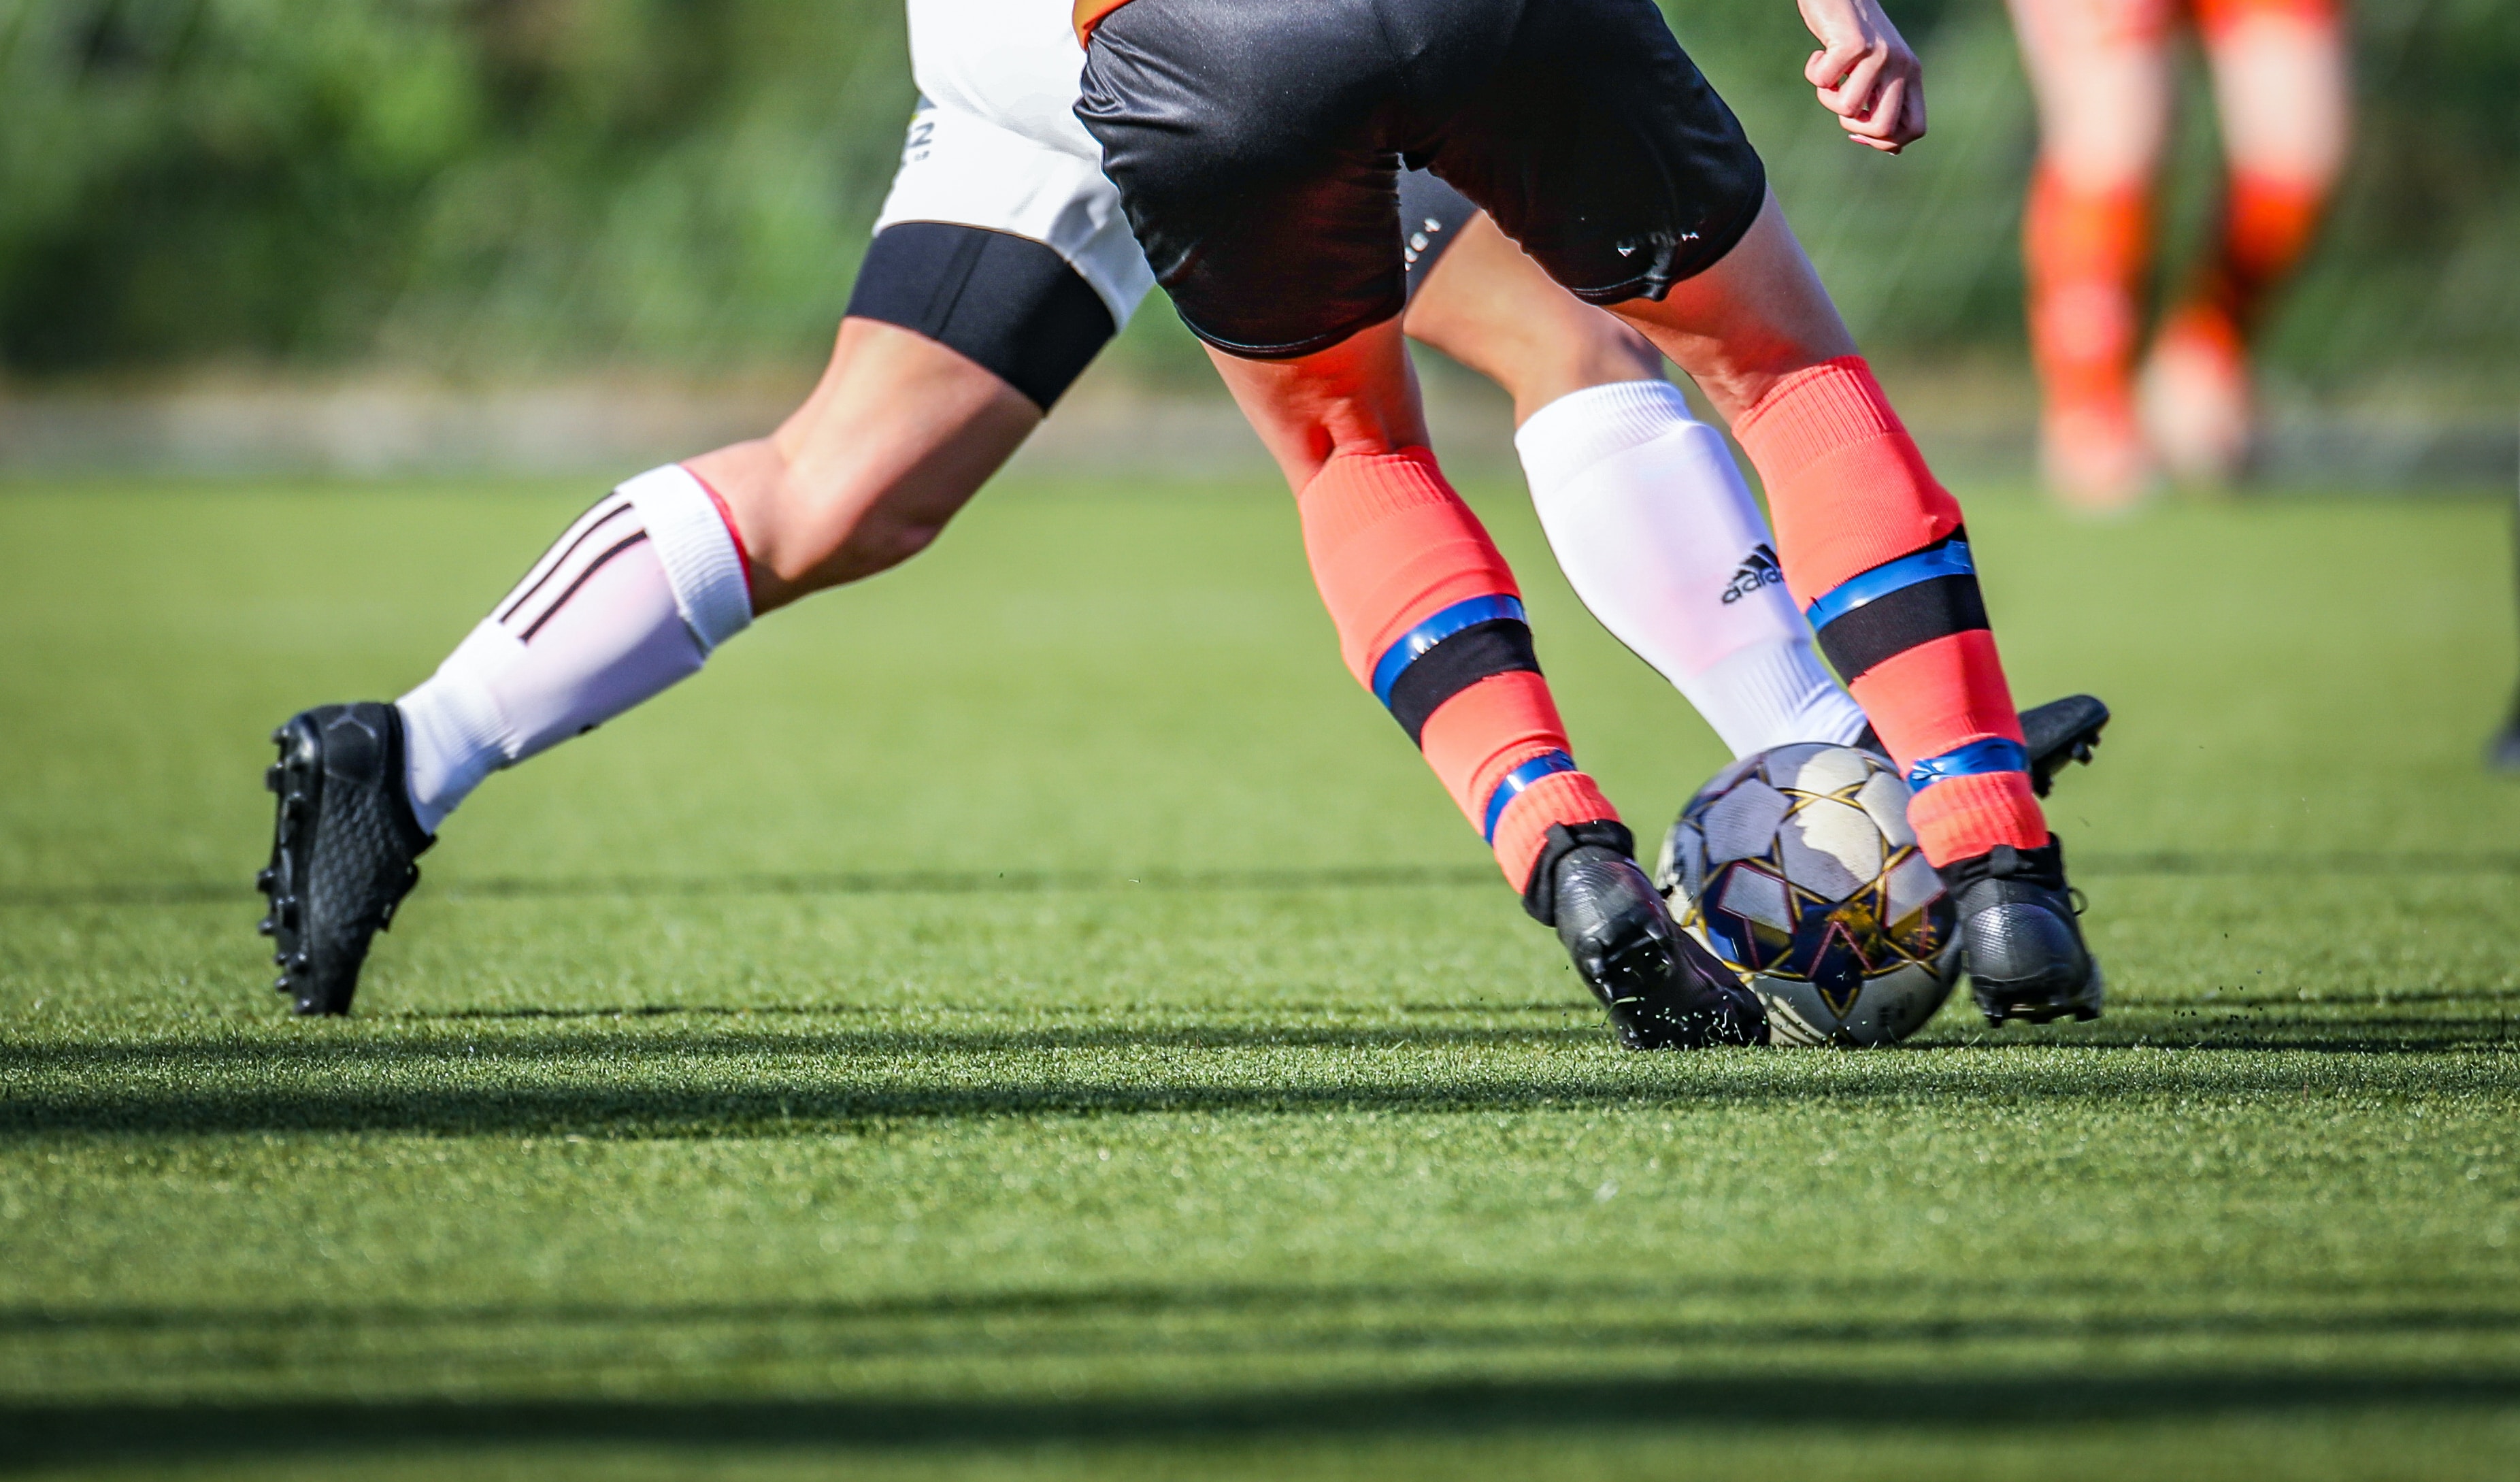 Legs of two footballers fighting for a ball on artificial turf